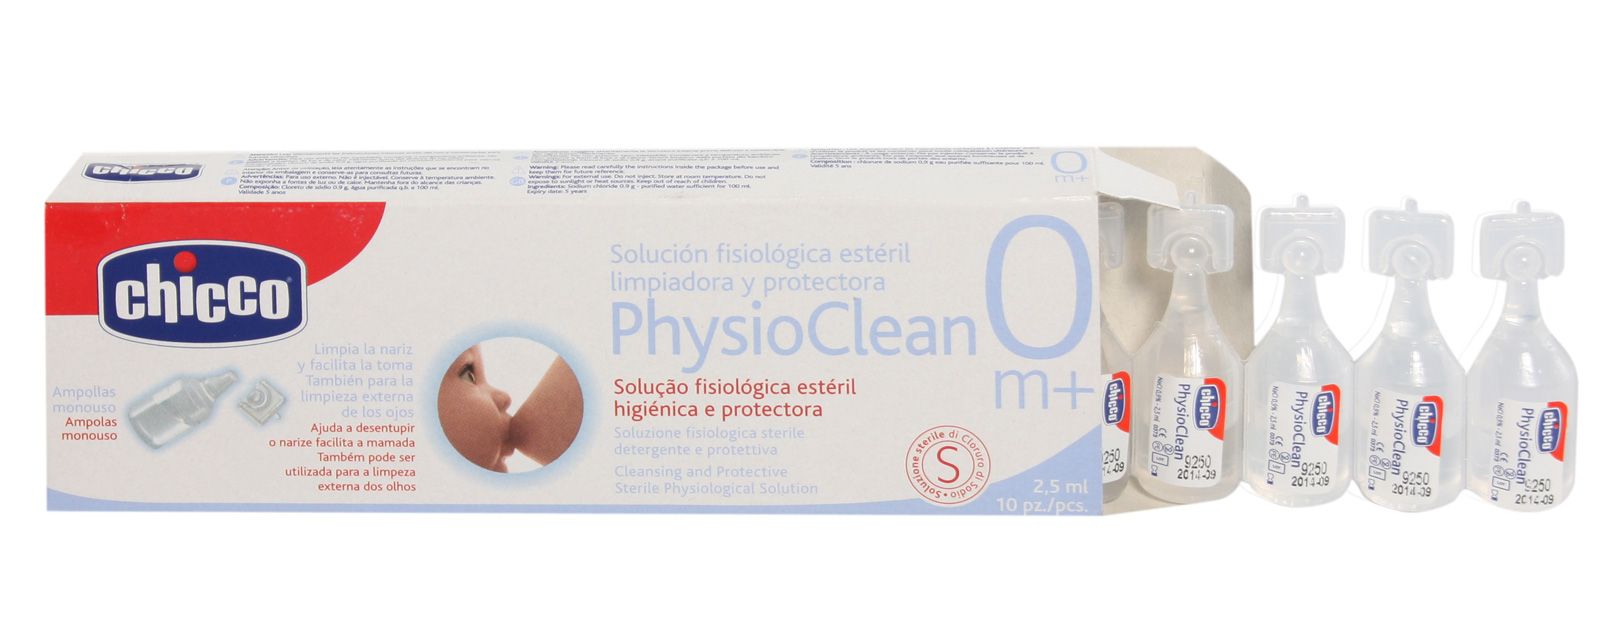 Chicco - PhysioClean